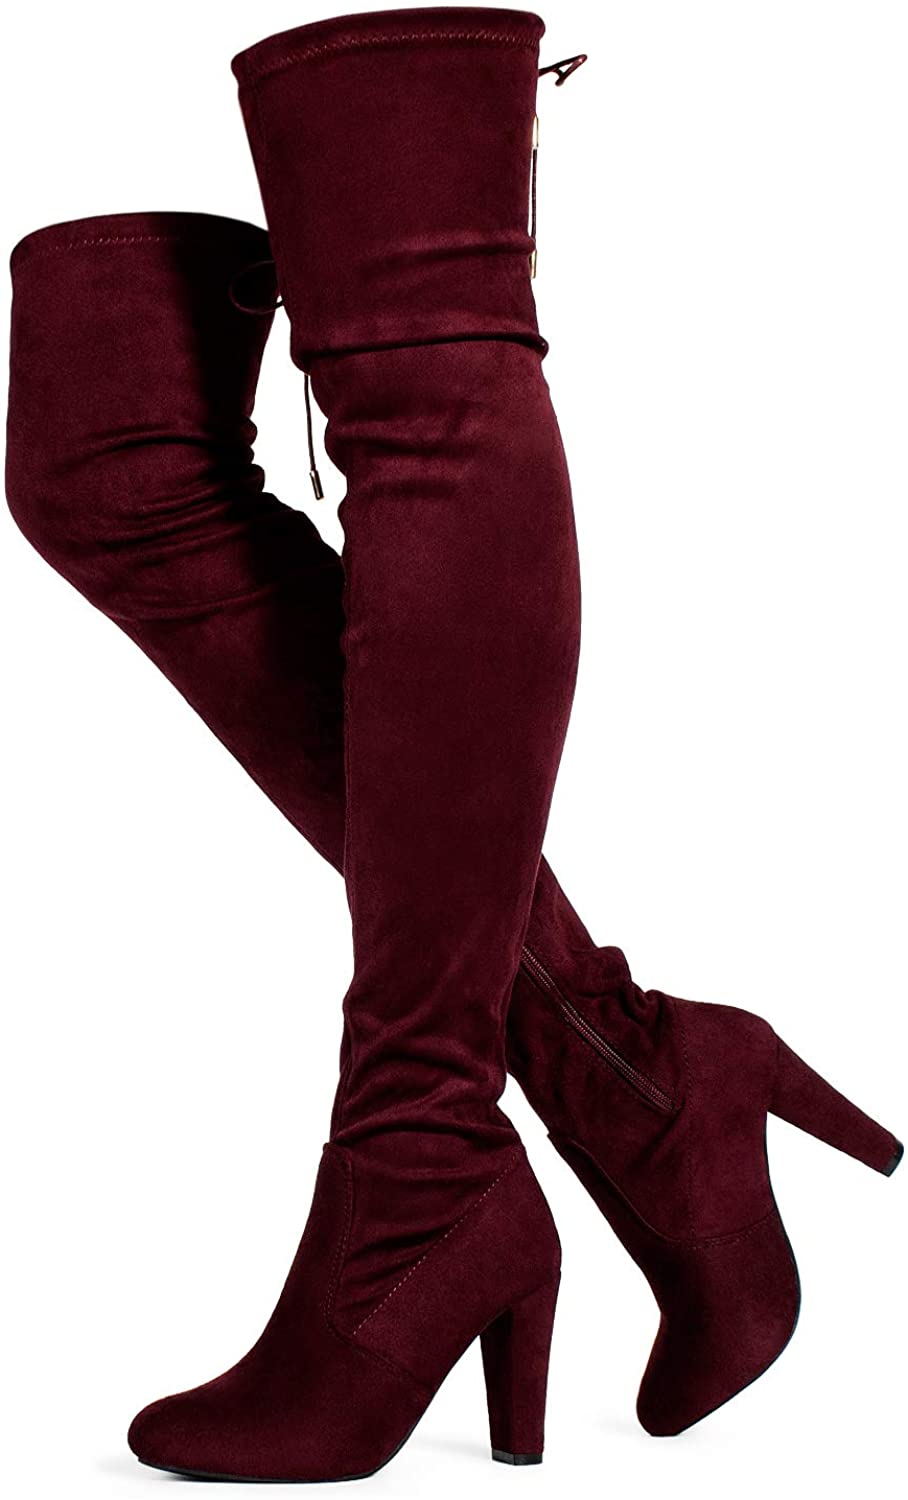 Medium & Wide Calf RF ROOM OF FASHION Chateau Women's Over The Knee Block Heel Stretch Boots 